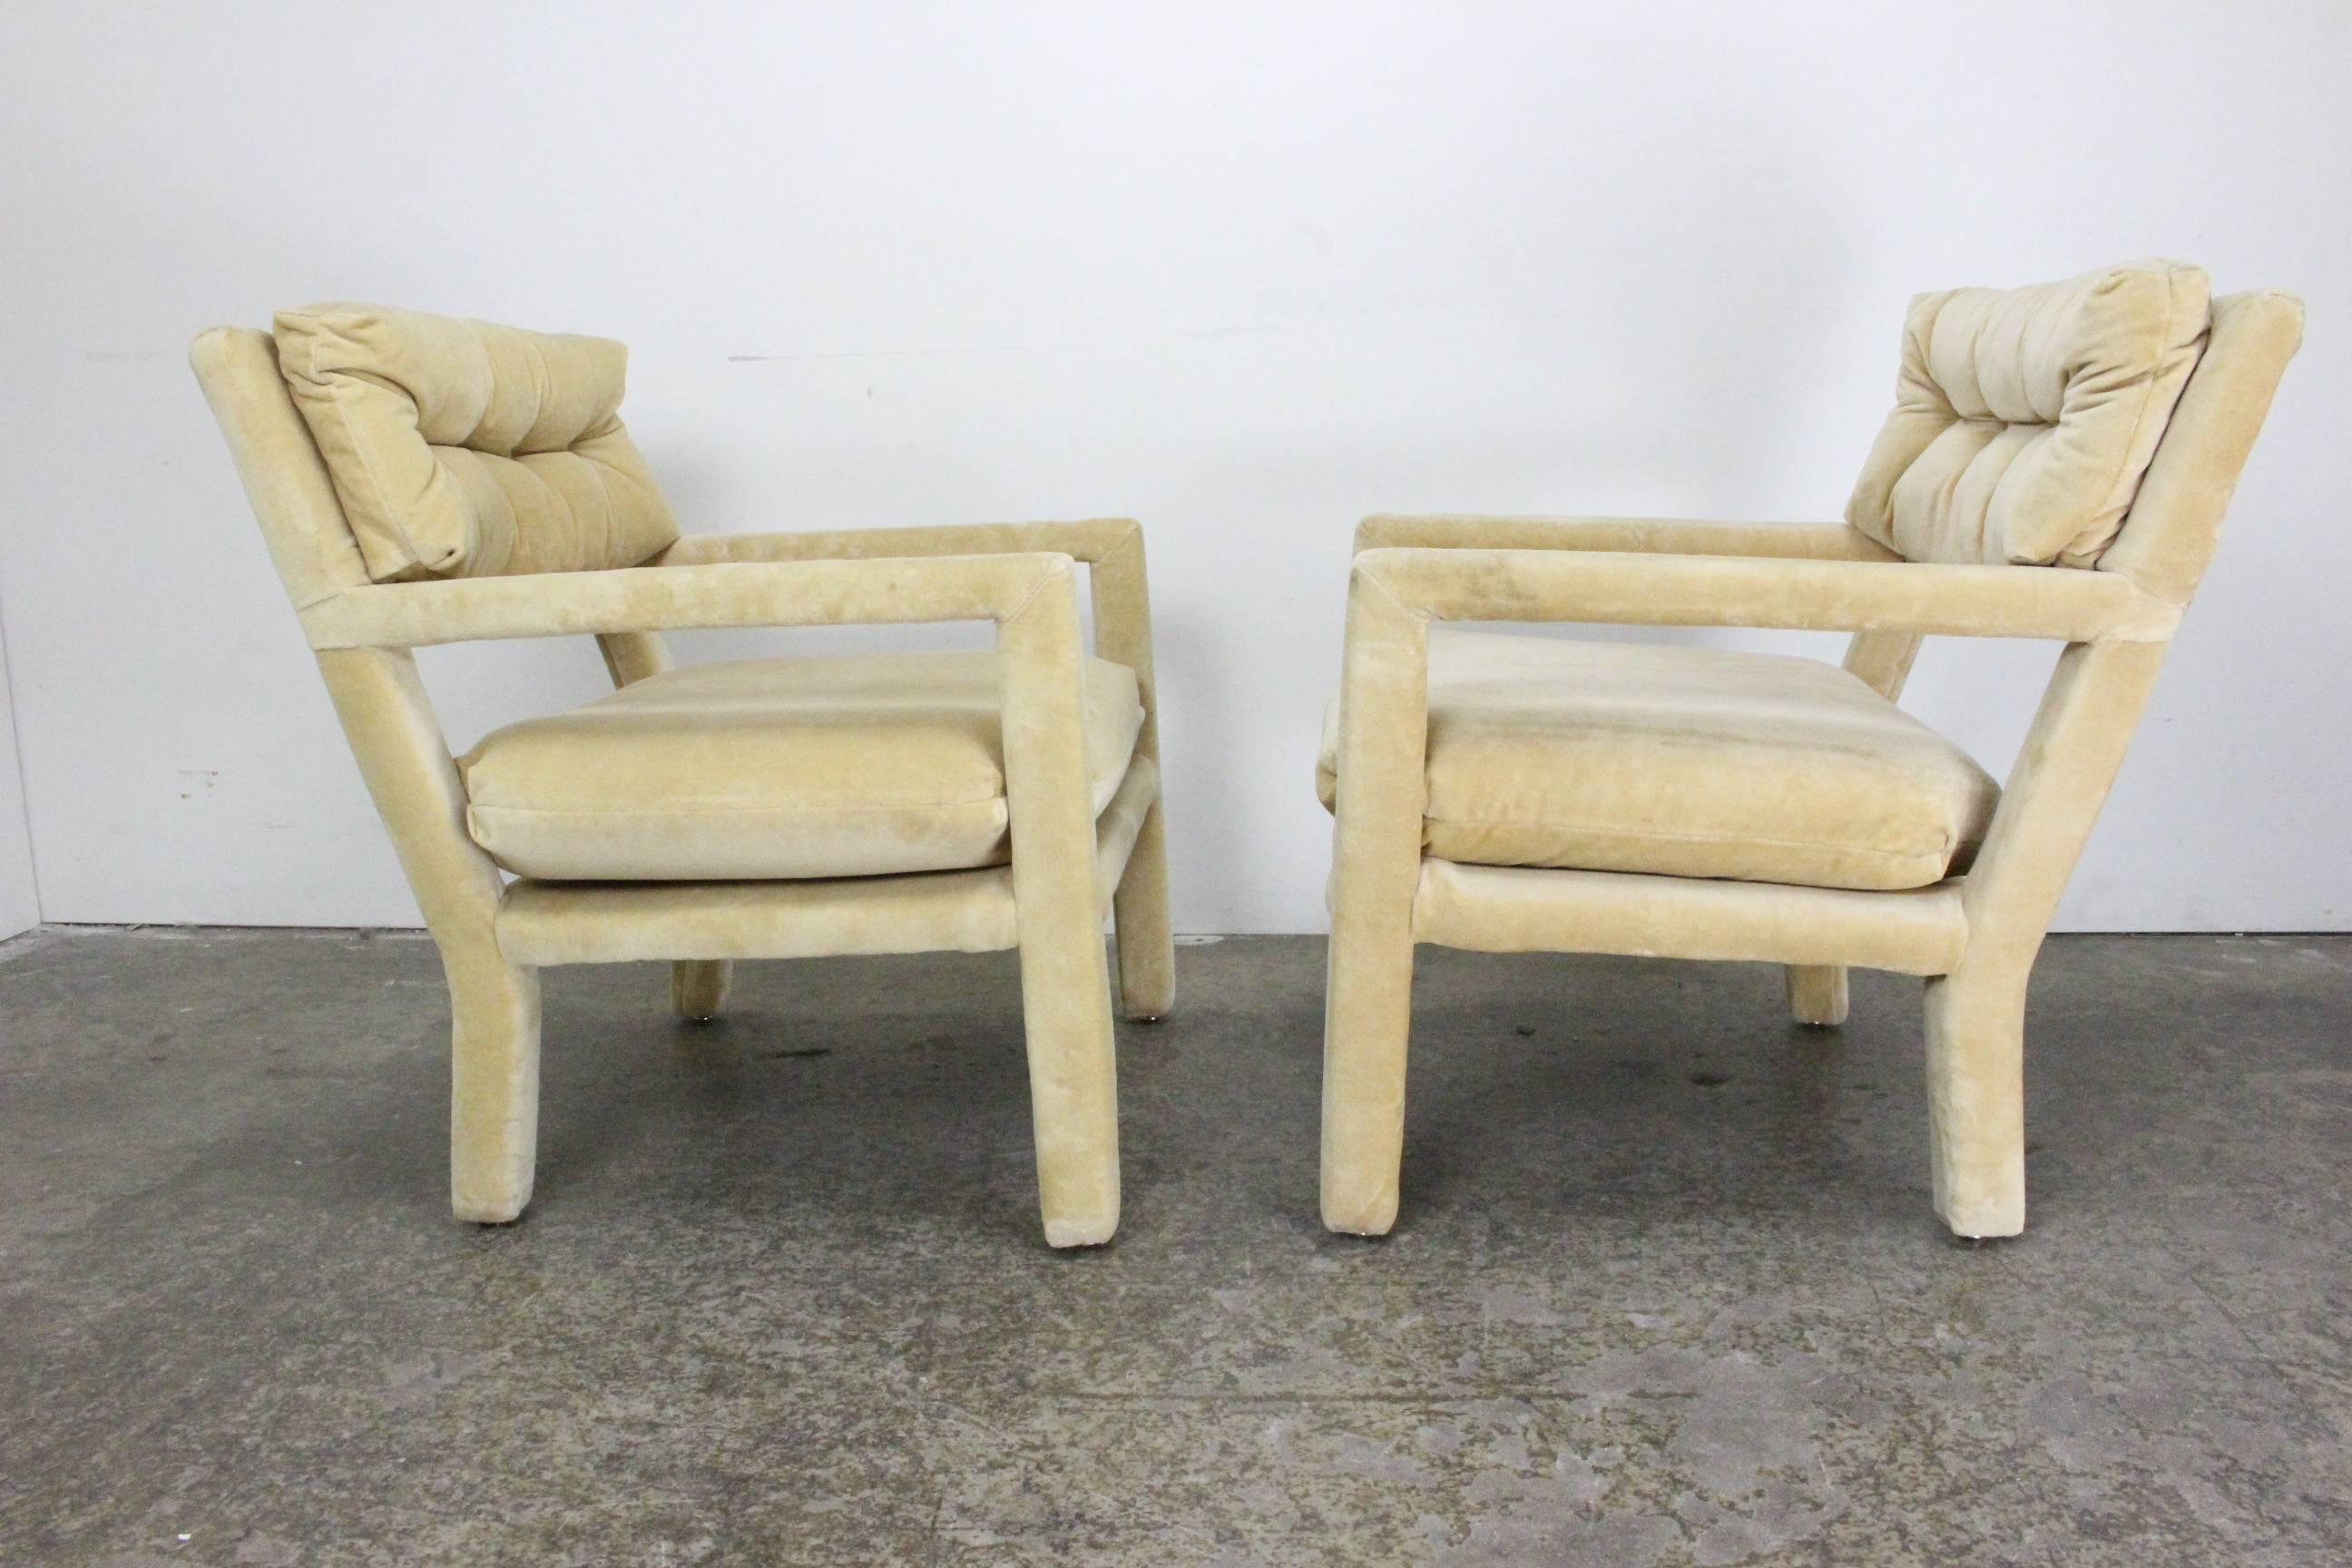 A wonderful pair of fully upholstered parsons chairs by Milo Baughman. Extremely comfortable with a mid scale, the chair do retain their original labels.